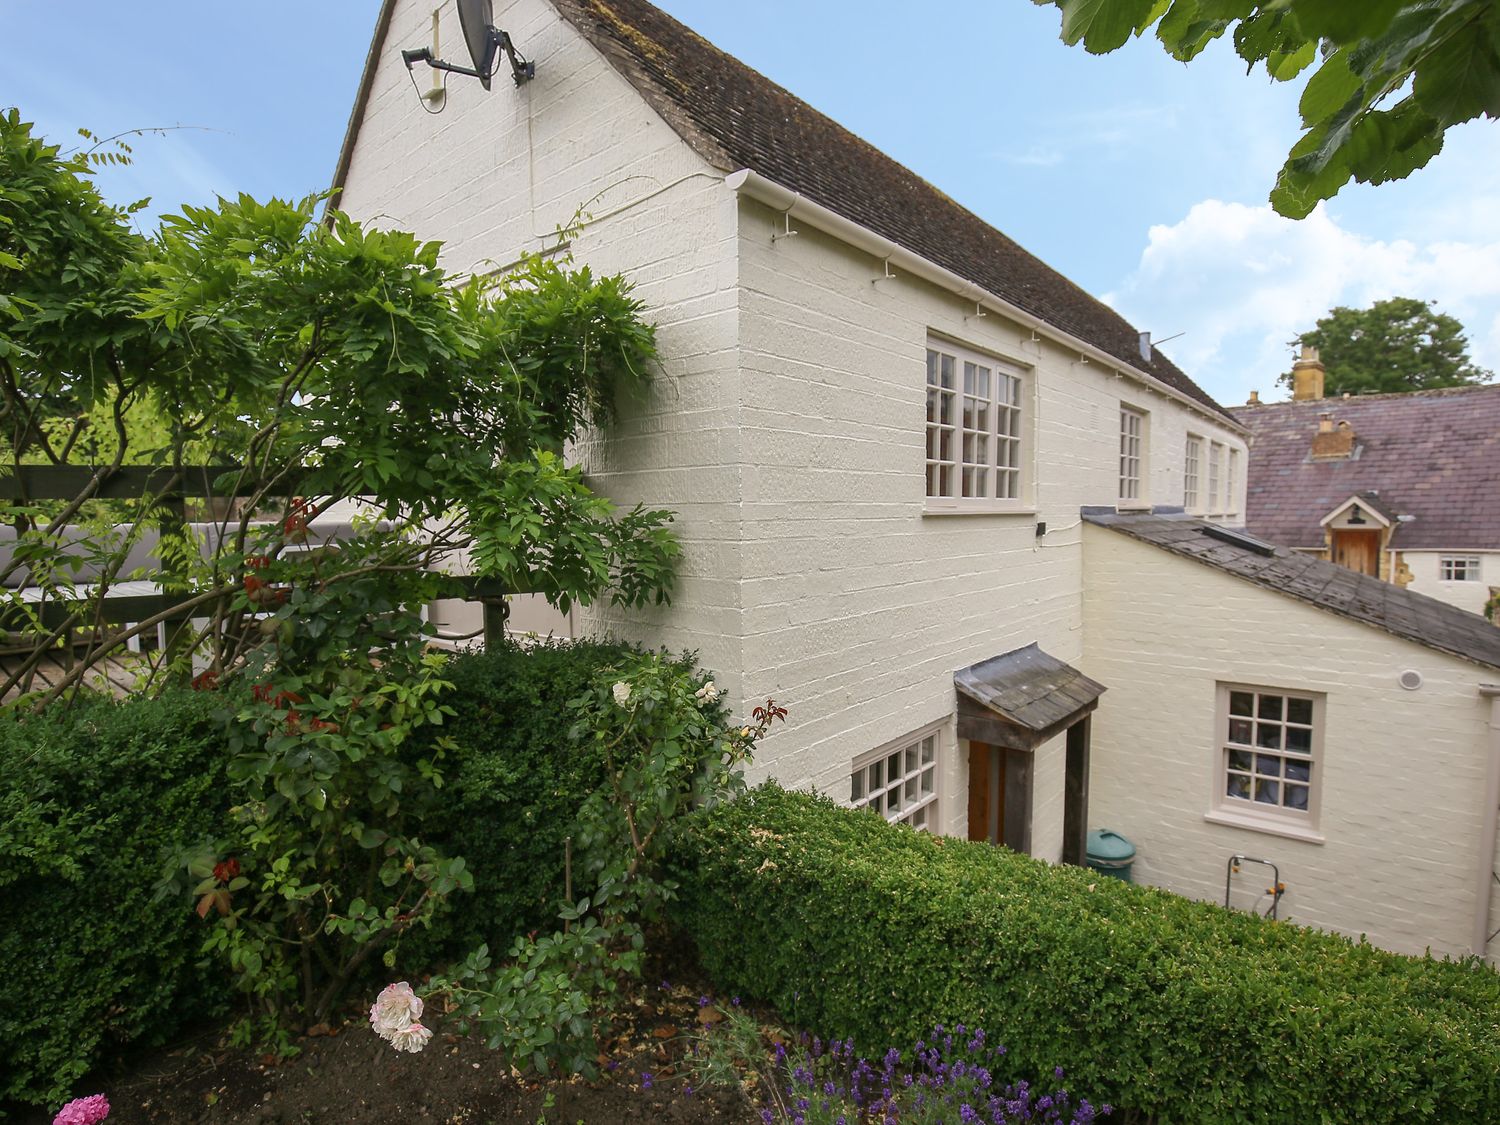 Kettle Cottage, Chipping Campden